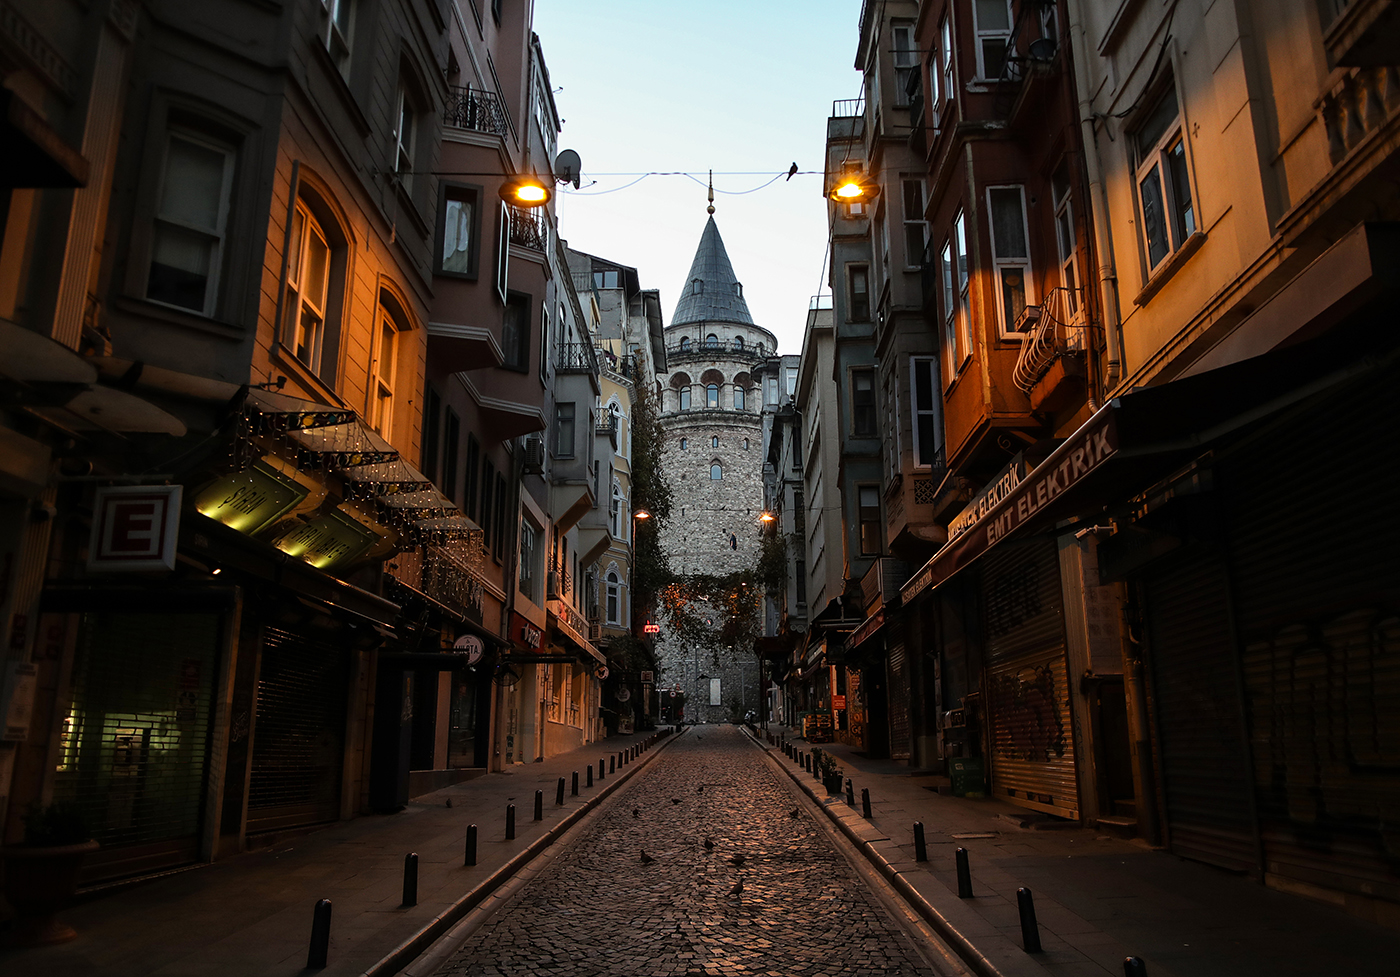 An empty street in front of the Galata Tower during a curfew in Istanbul, Turkey, 06 December 2020. Turkey will impose curfews on weekdays and full lockdowns over weekends to combat the spread of the coronavirus, President Tayyip Erdogan said on 30 November, after new cases and deaths hit records highs in recent weeks.